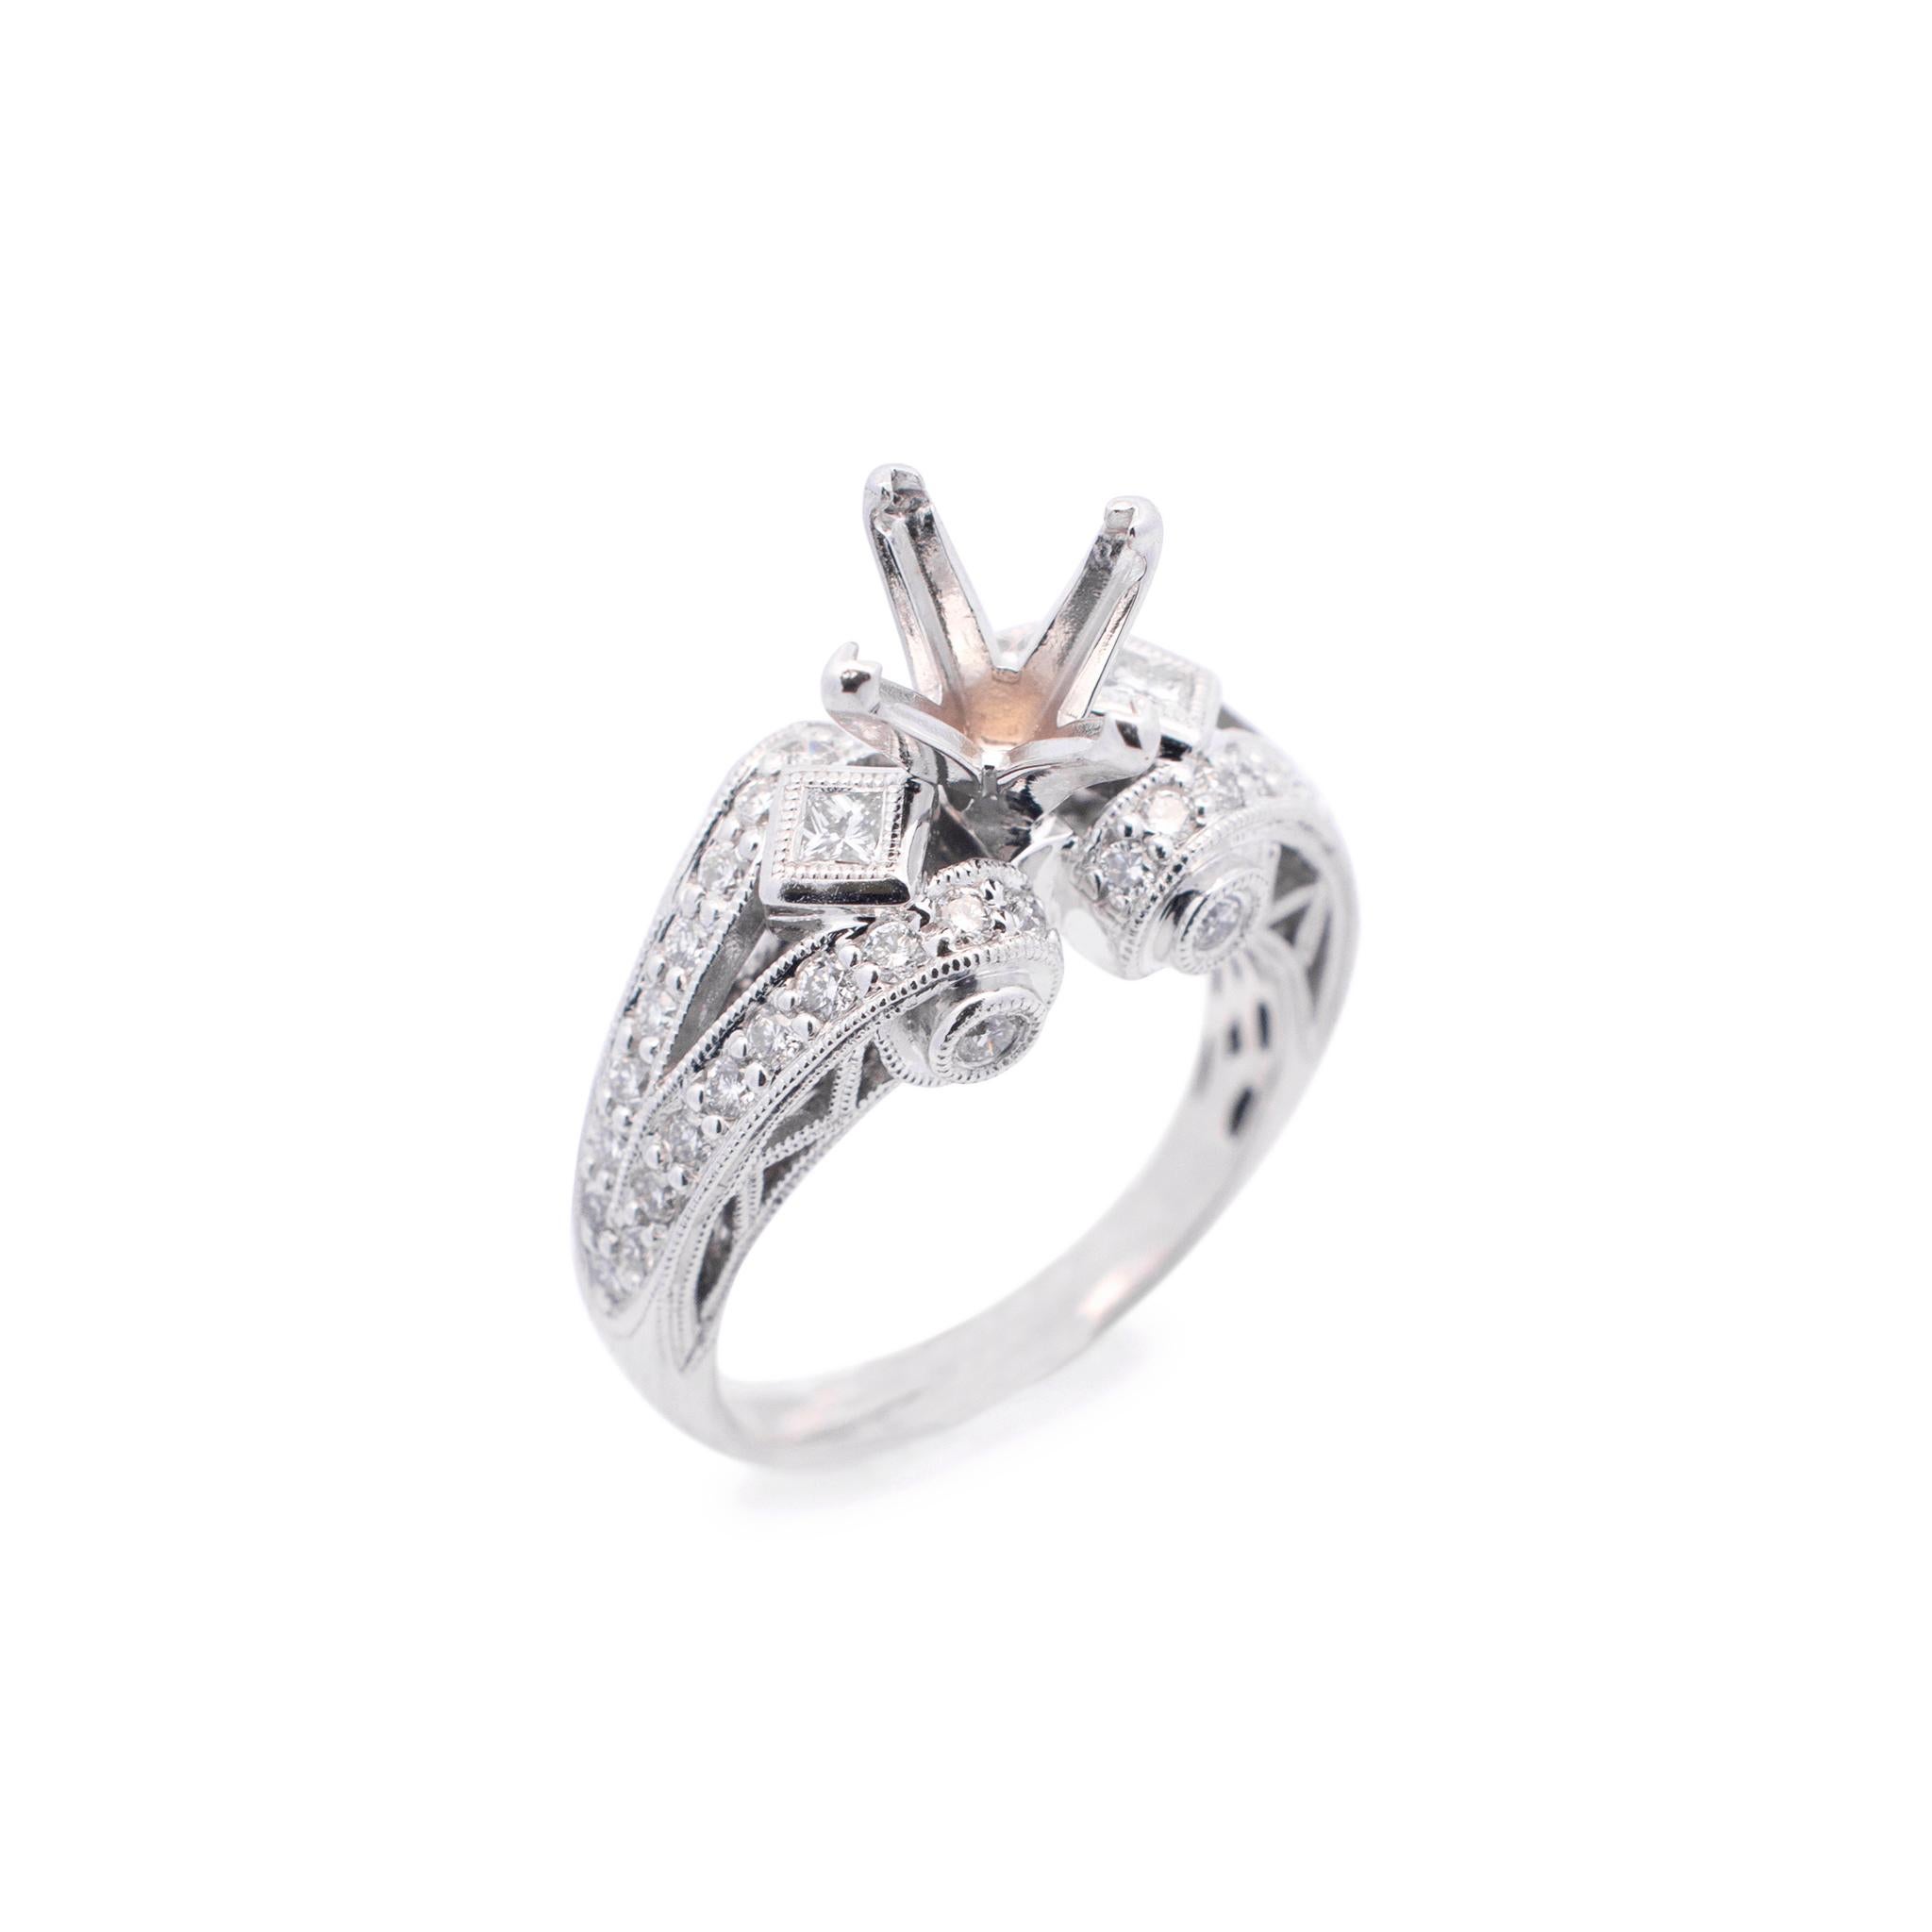 Gender: Ladies

Metal Type: 18K White Gold

Size (US): 6

Shank Width: 9.65mm tapering to 2.10mm

Can Hold a center stone of Princesses Cut Square Emerald or Any Square Shape measures approximately 6.20mm to 6.70mm in diameter.

Weight: